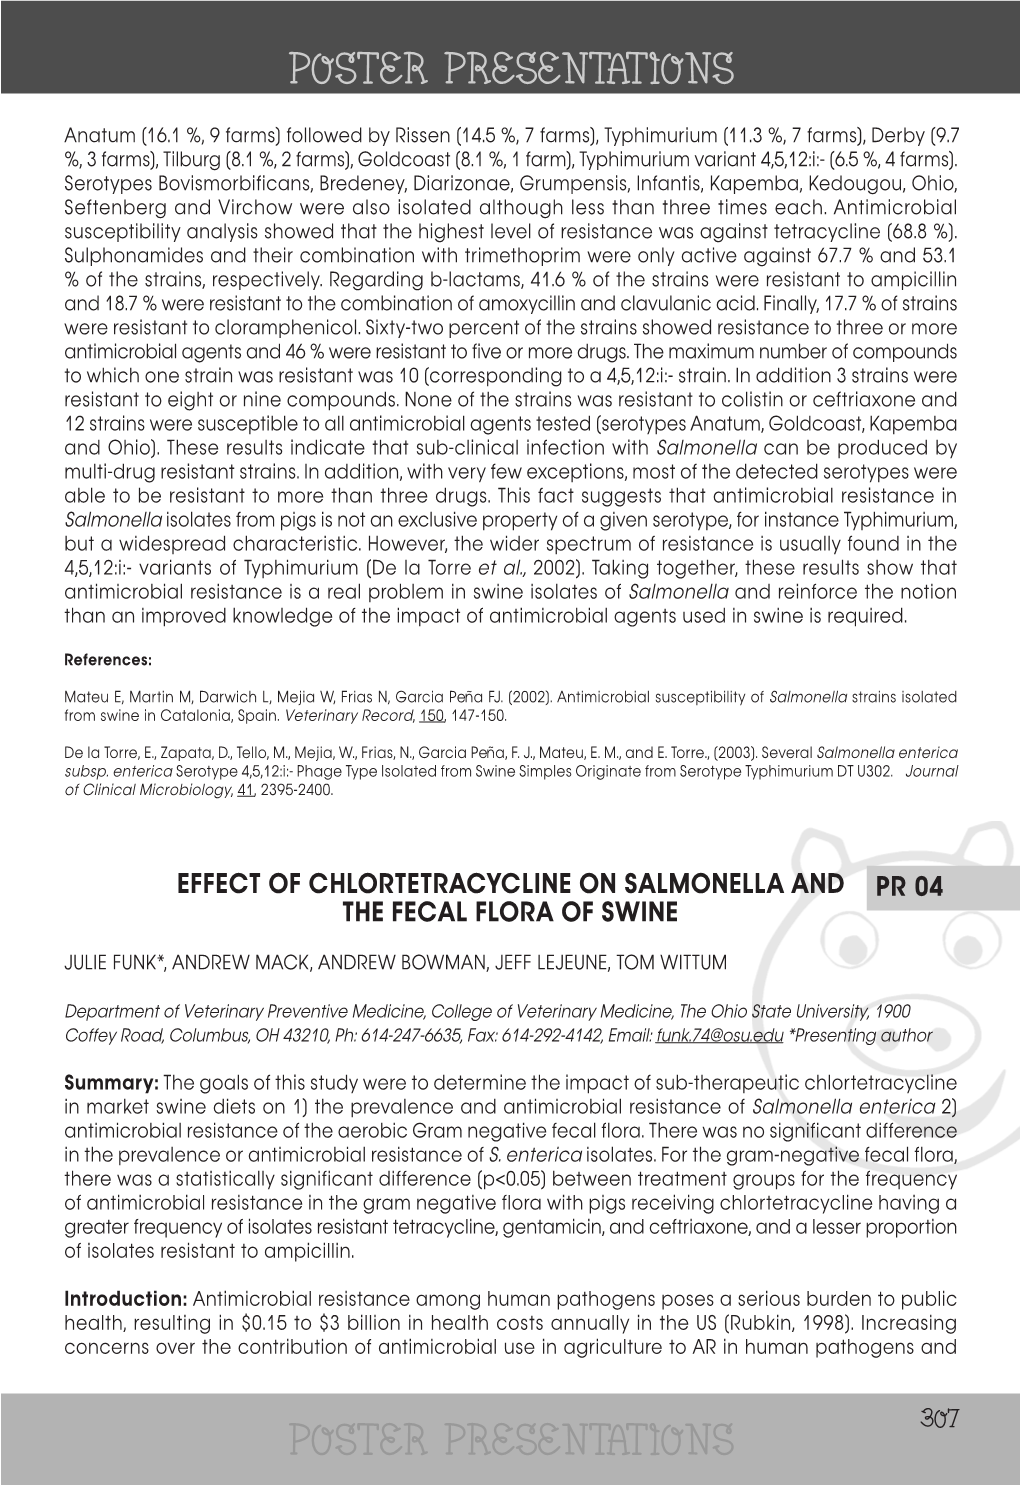 Effect of Chlortetracycline on Salmonella and the Fecal Flora Of